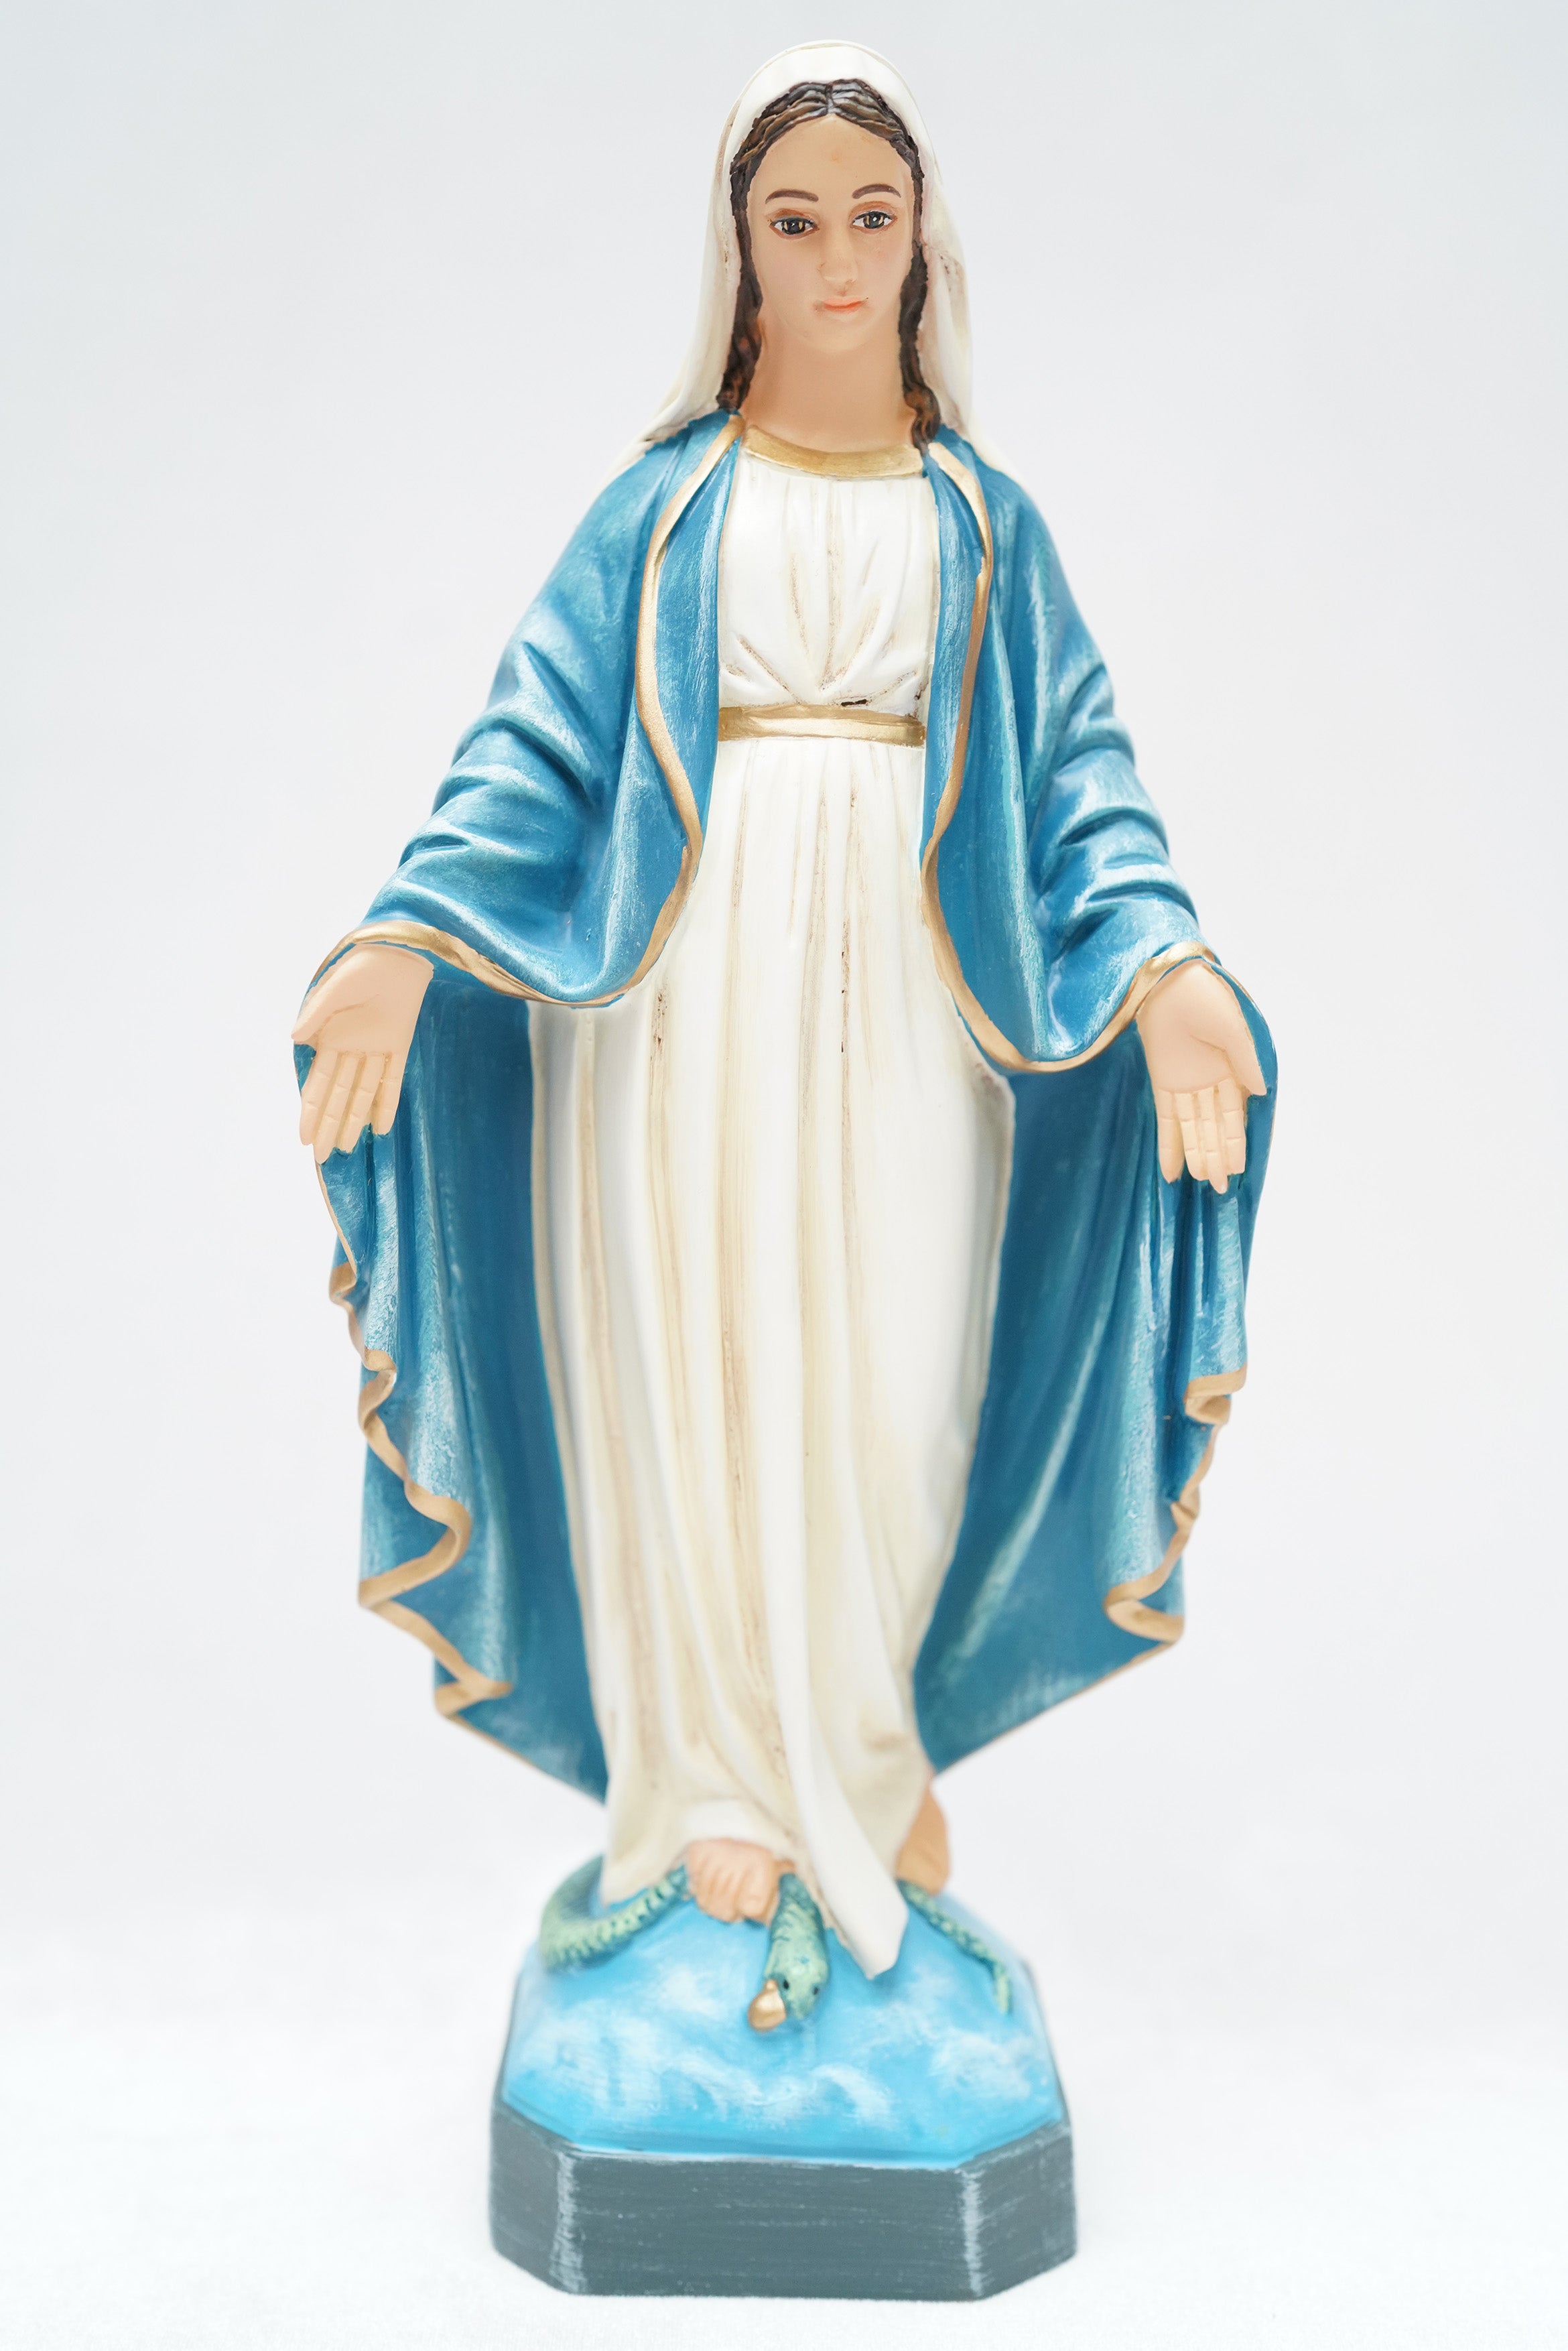 12 Inch Our Lady of Grace Virgin Mary Mother Catholic Statue Figurine Vittoria Collection Made in Italy